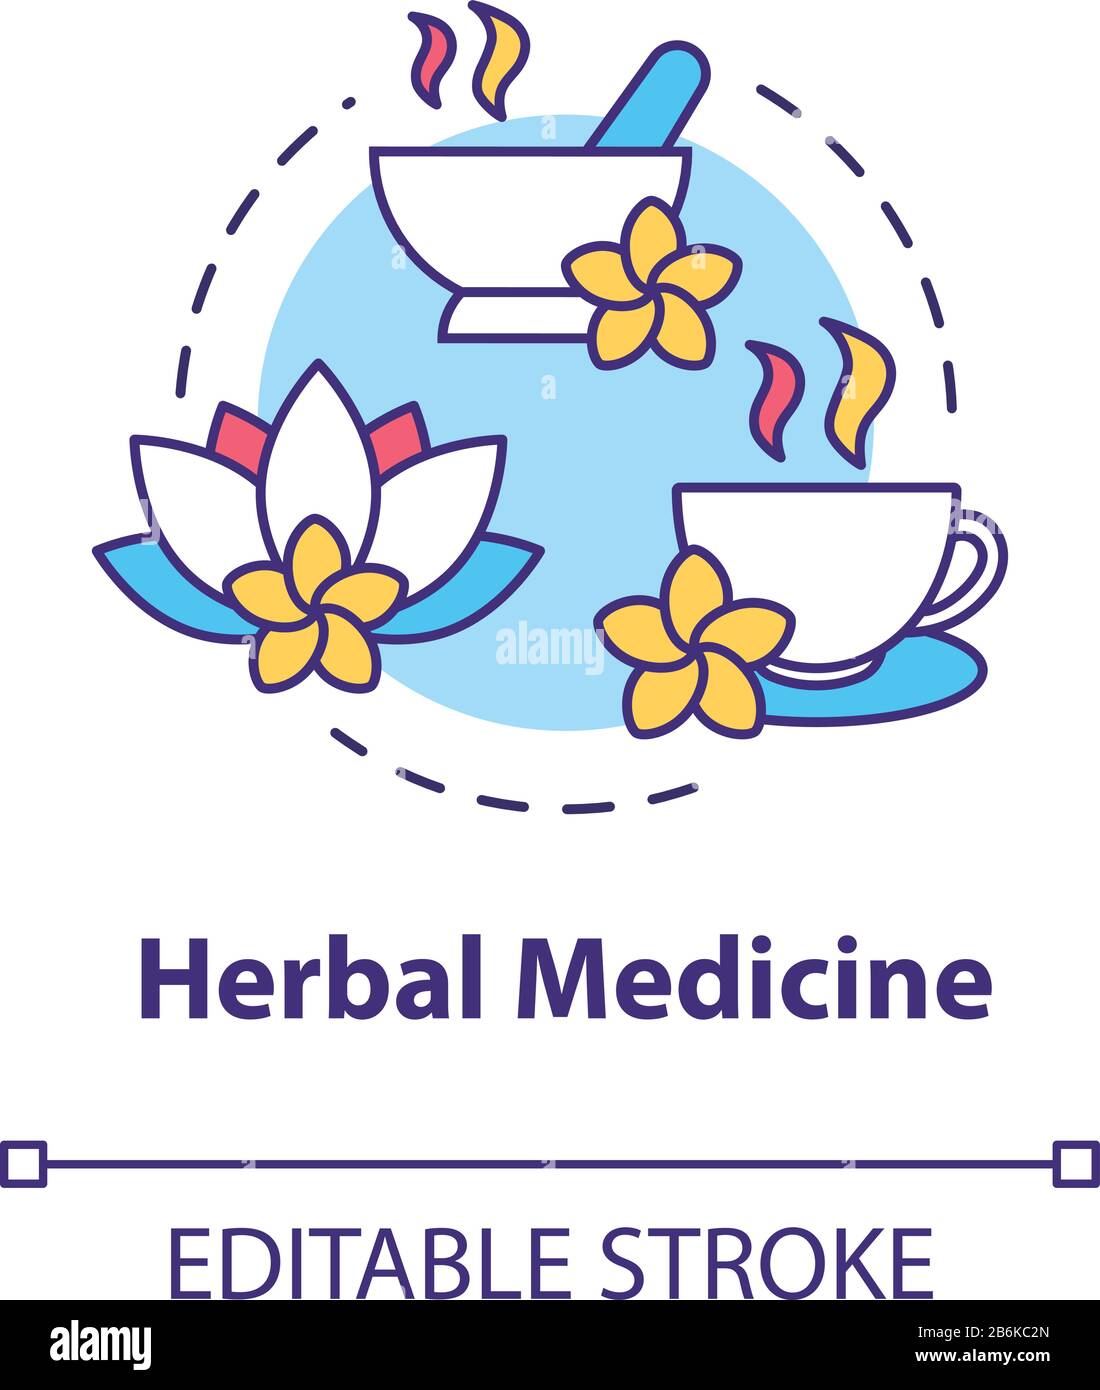 Herbal medicine concept icon. Alternative therapy, herbalism idea thin line illustration. Traditional treatment with medicinal plants. Vector isolated Stock Vector